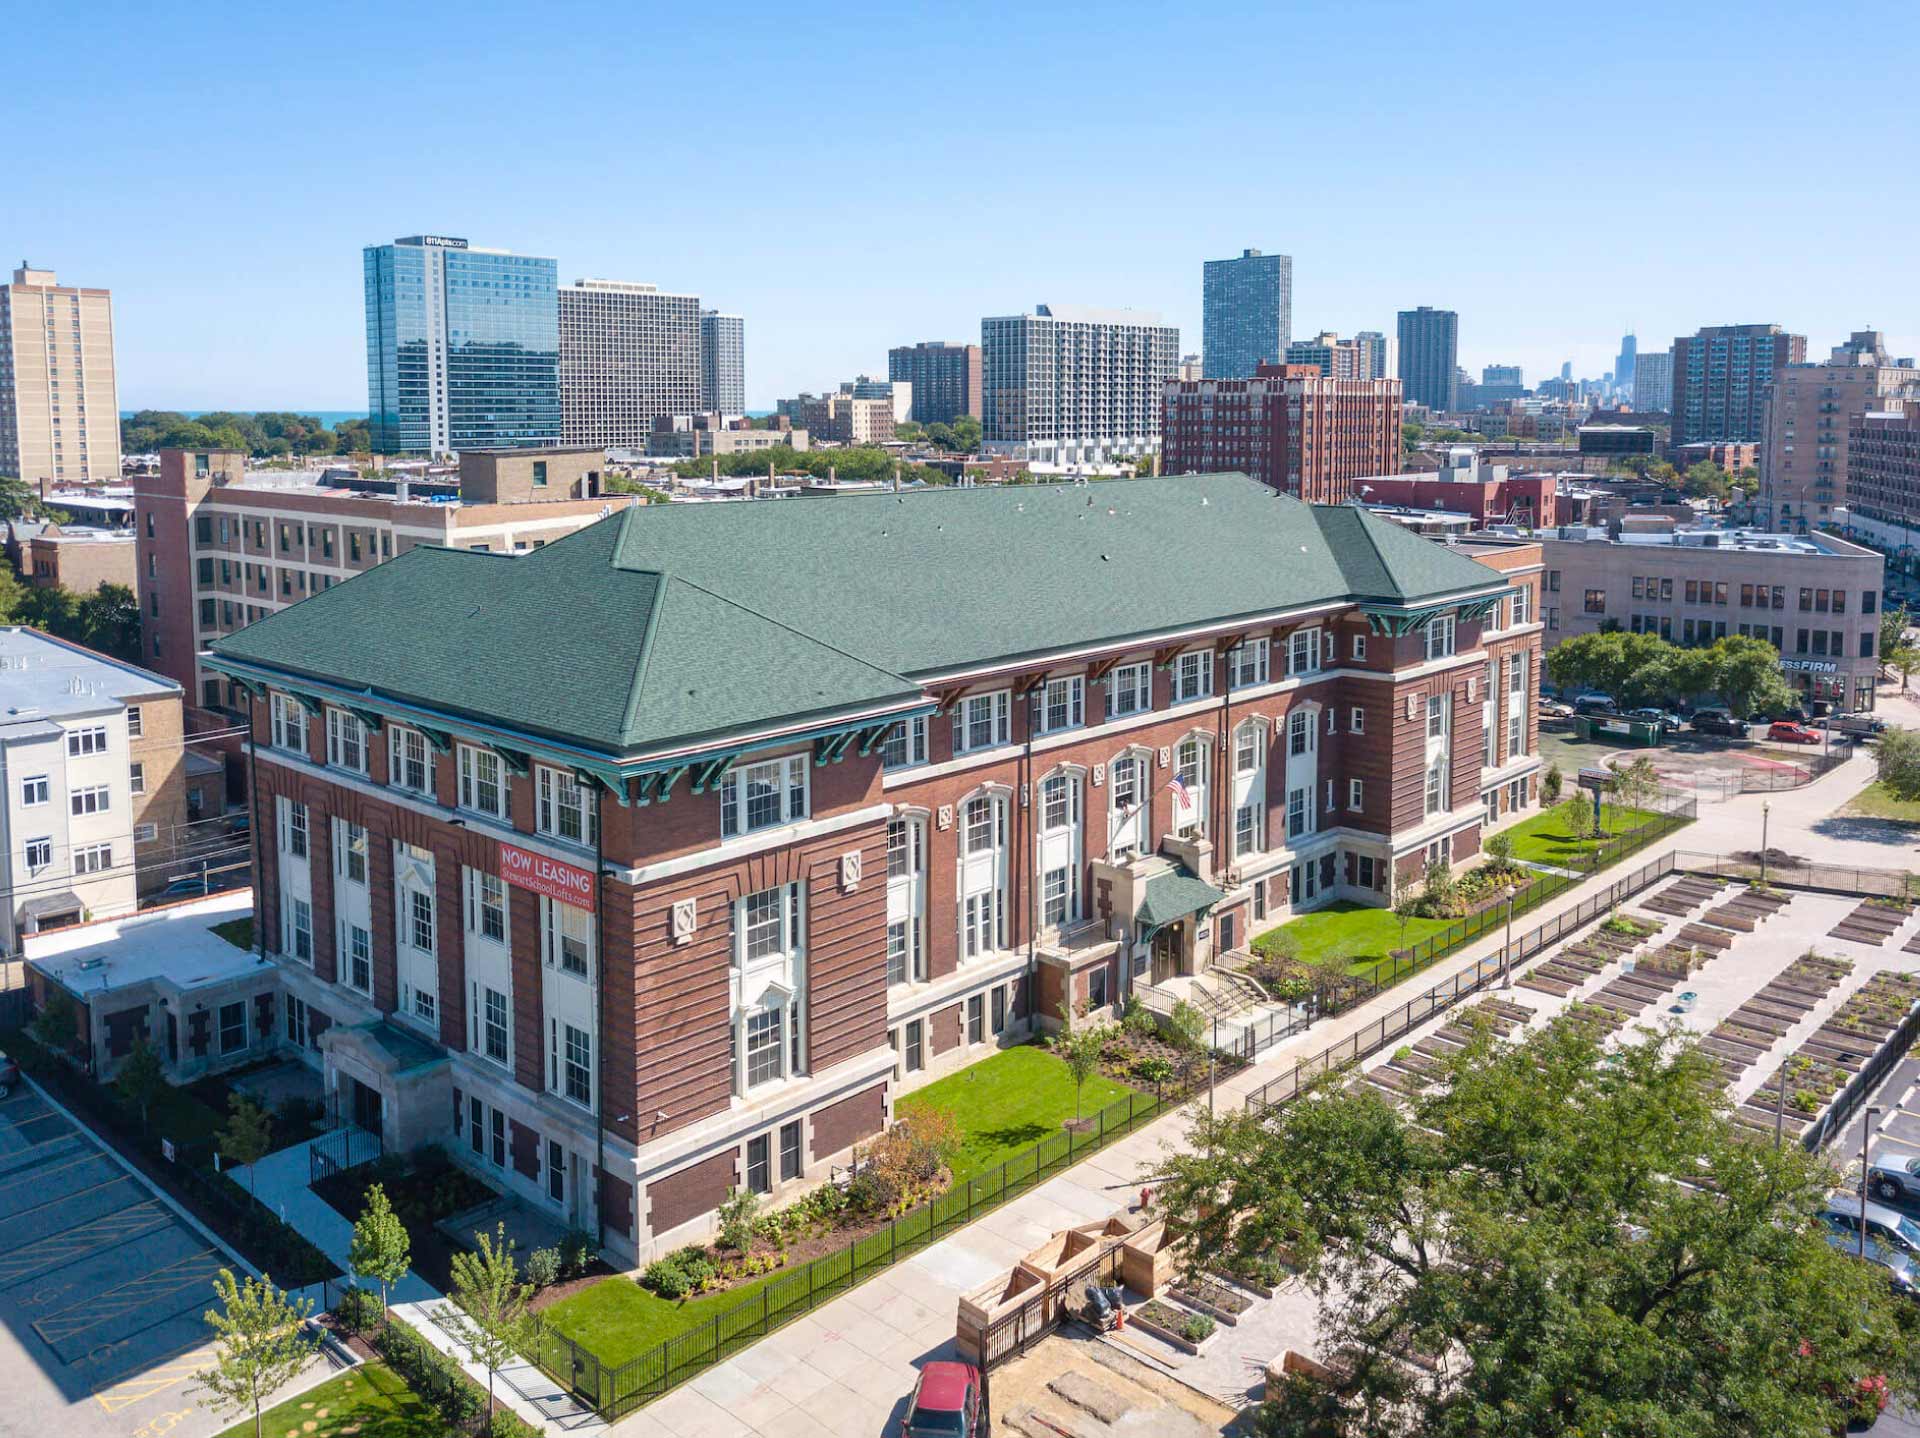 Exterior, aerial view of Stewart School Lofts building and surrounding urban area.